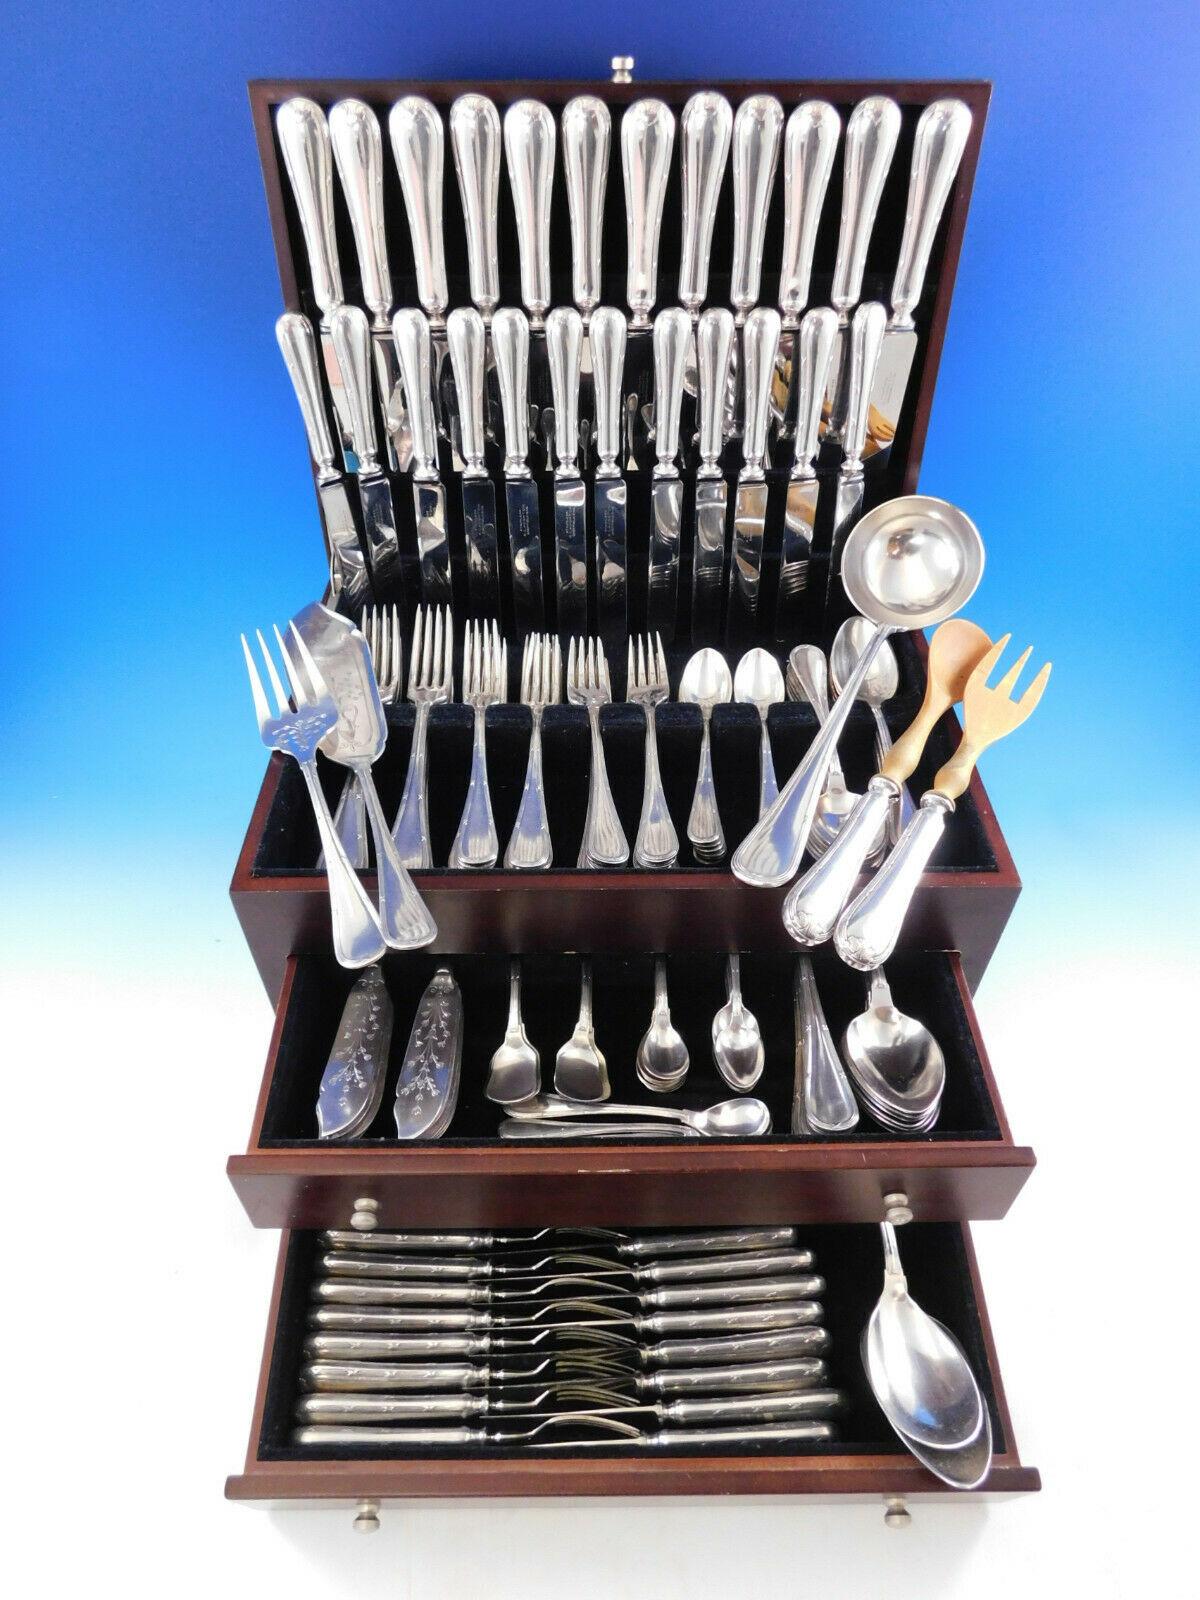 Superb Bougainville by Hacker & Hermann Austria silverplate flatware set, 175 pieces. This fabulous cutlery service includes:

12 dinner size knives, 10 3/8